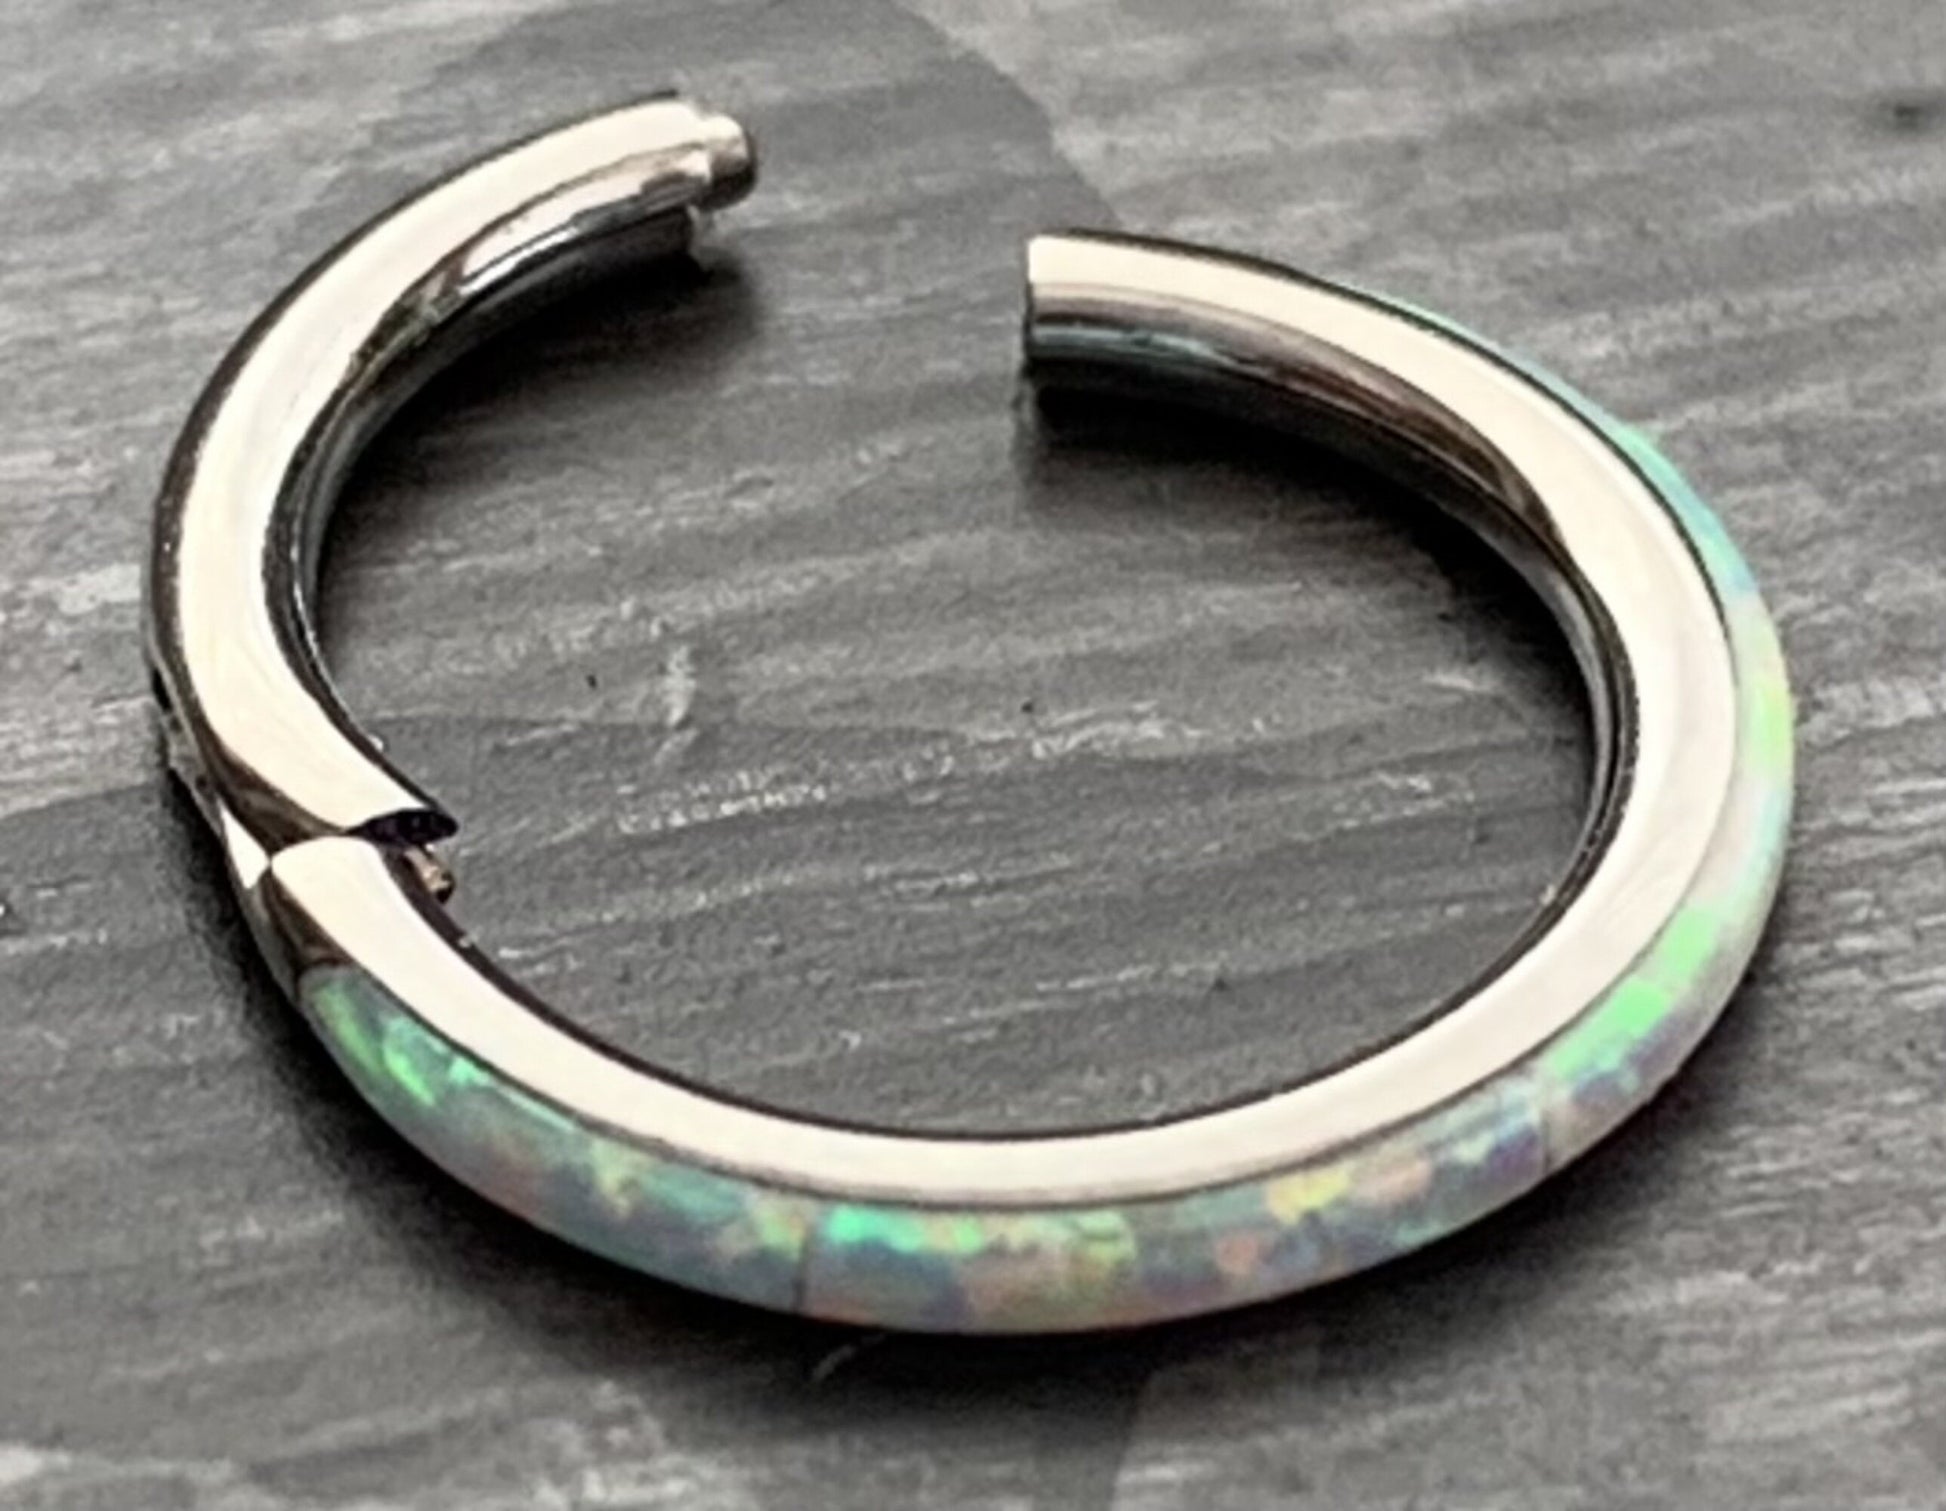 1 Piece Implant Grade Titanium Opal Outer Edge Hinged Segment Septum Ring - White, Pink, Blue - Gauge 16g, Diameter 10mm or 8mm available!